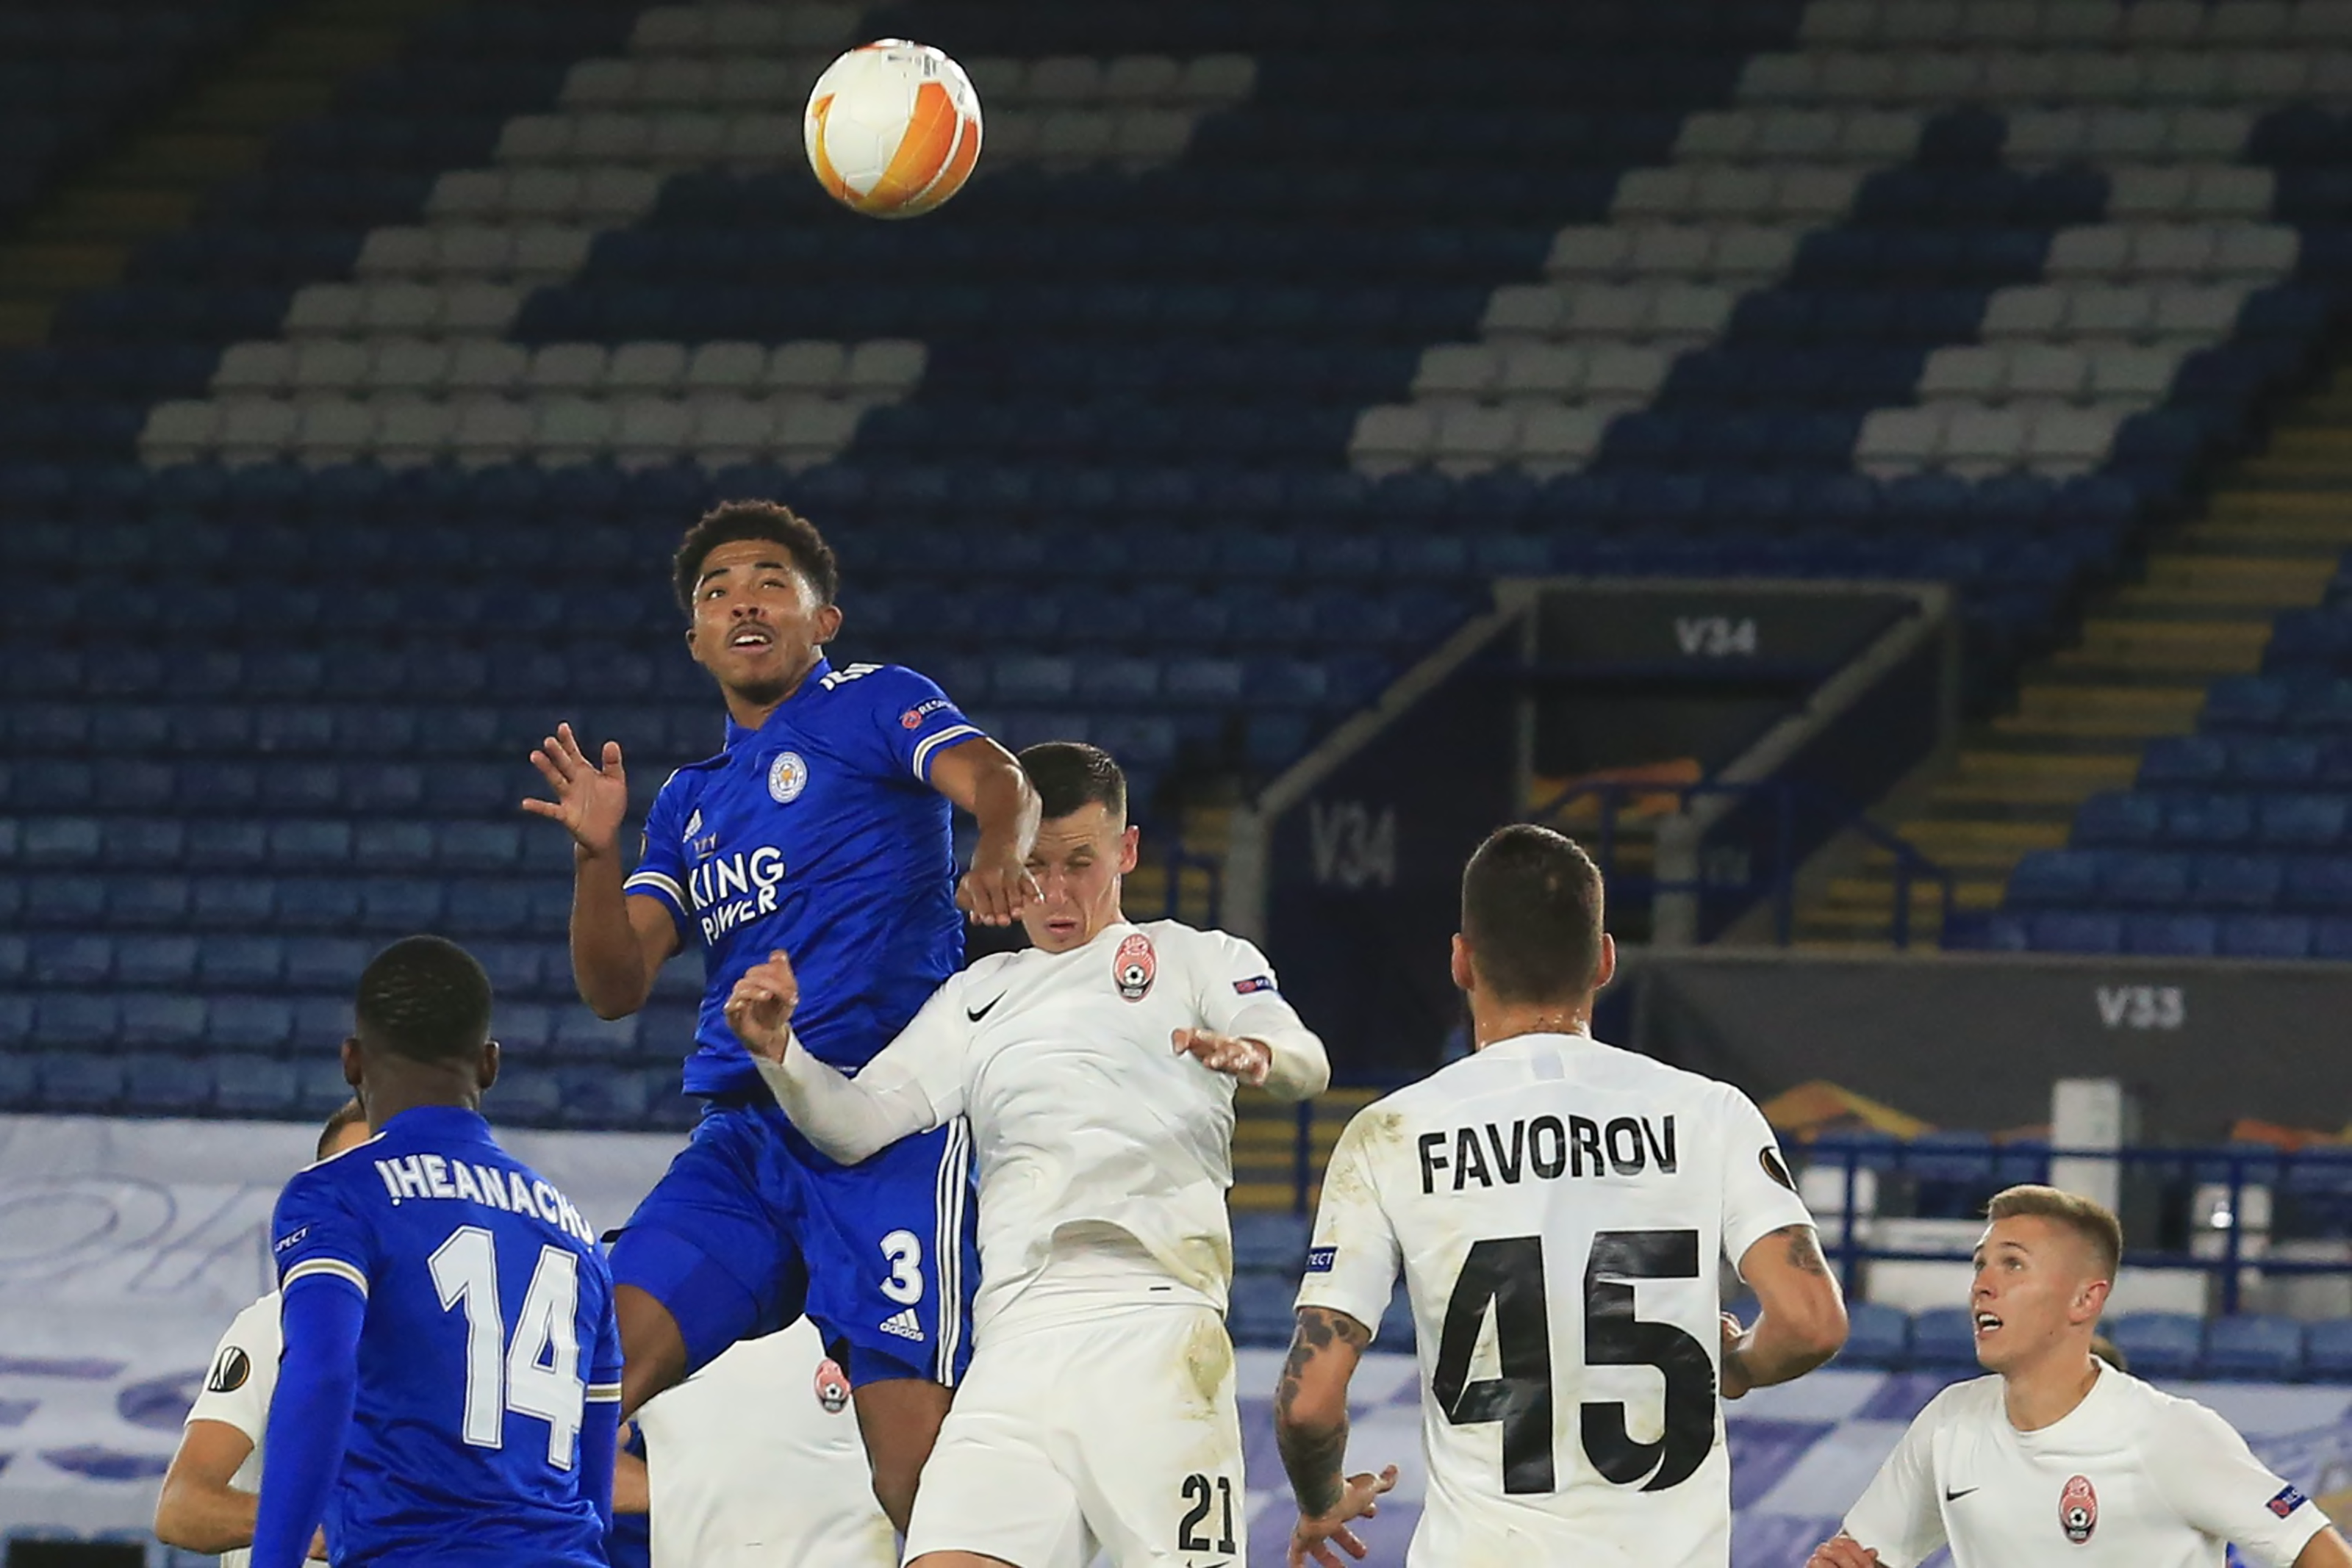 Leicester City 3-0 Zorya Luhansk: player ratings, Barnes reignited - Page 2